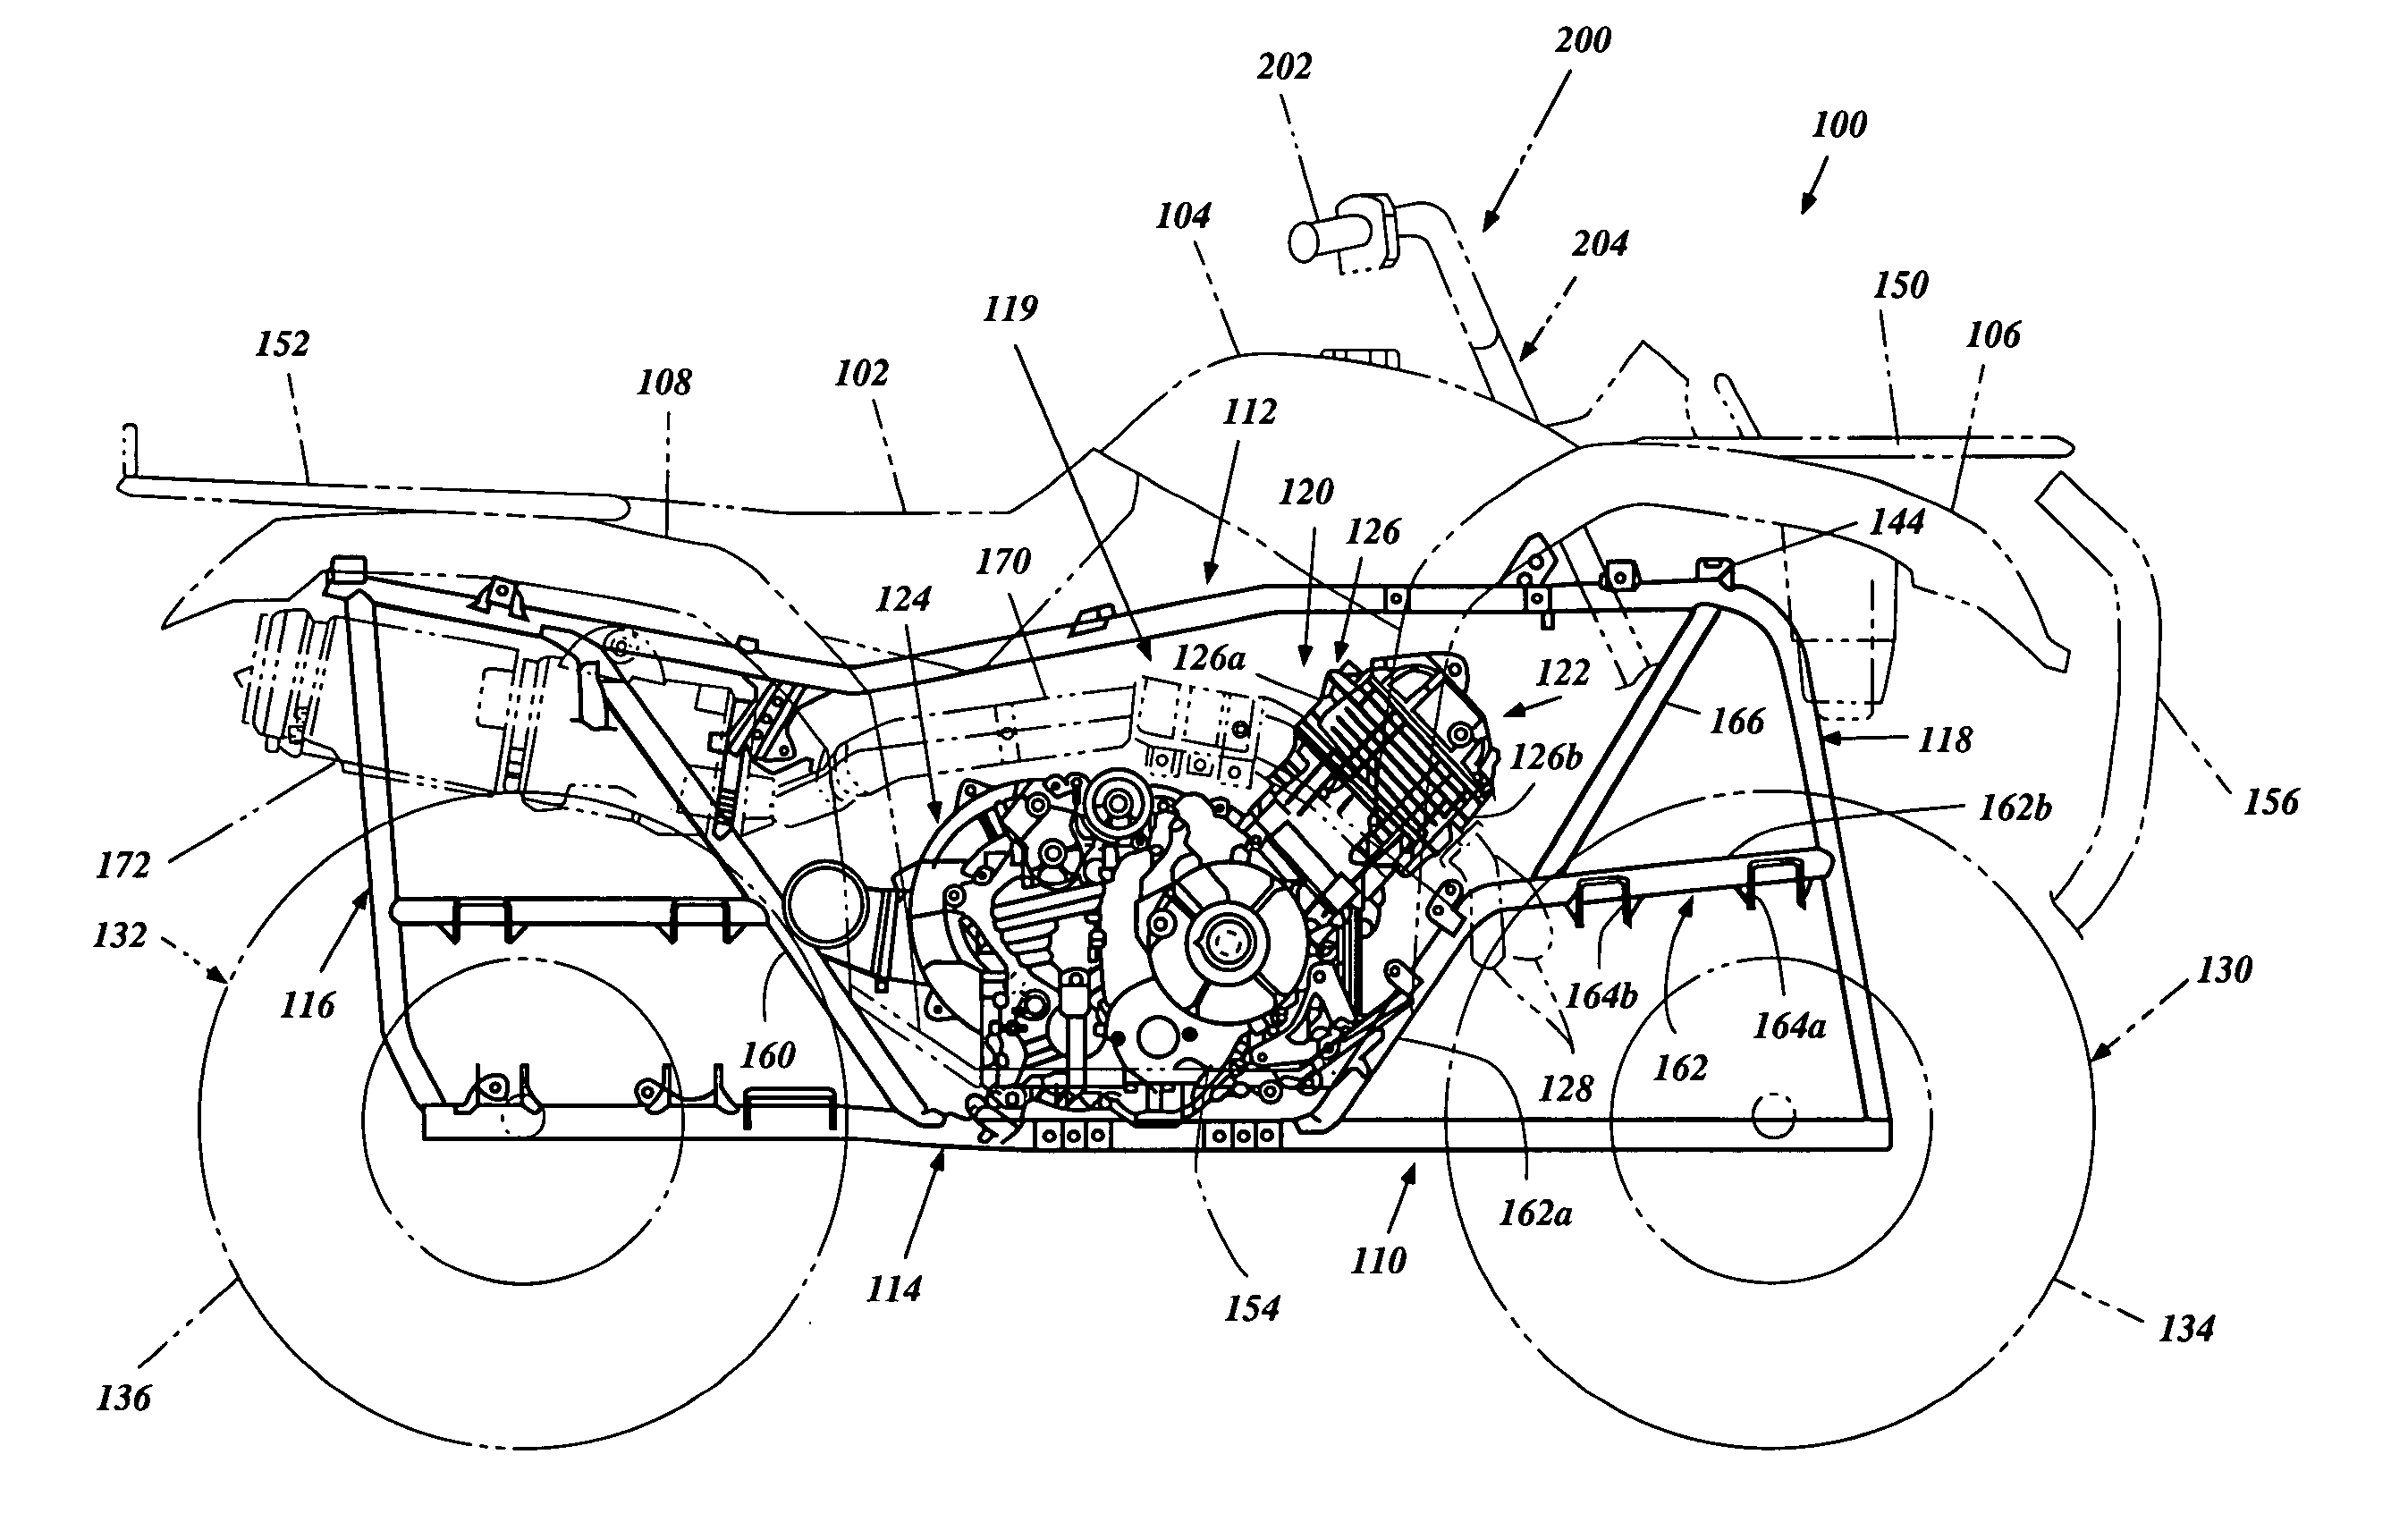 Small vehicle with power steering assembly